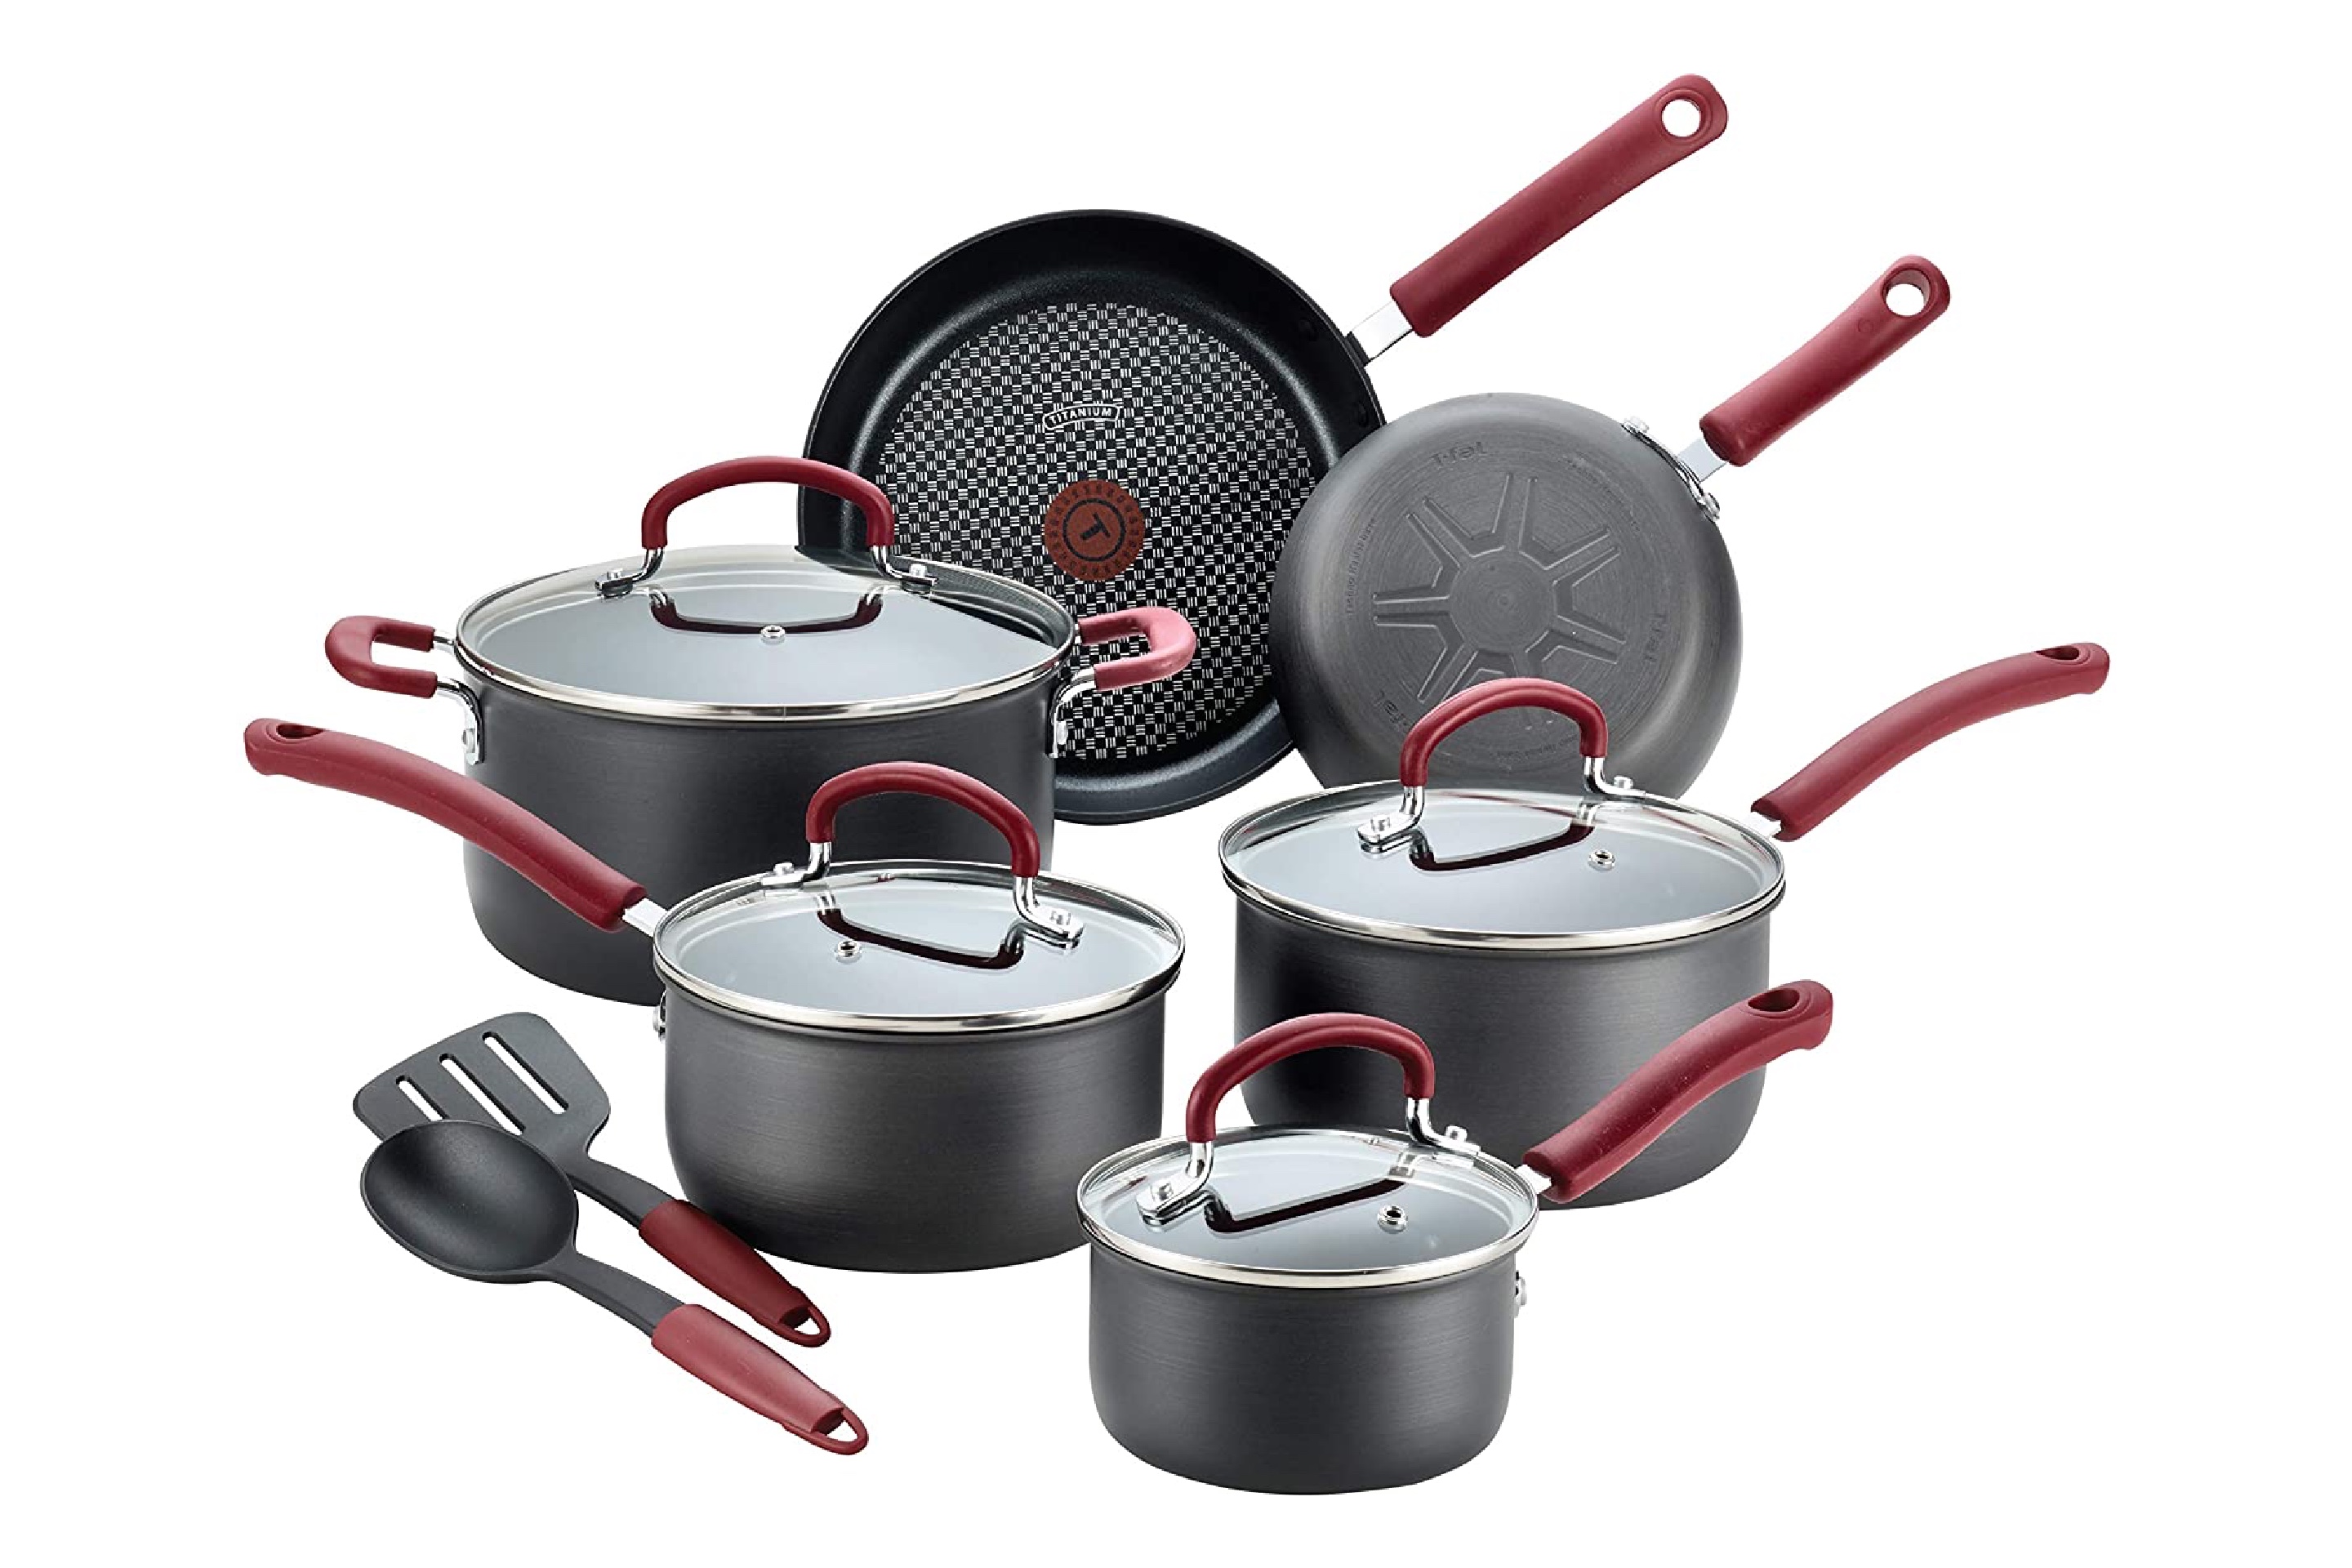 T-fal Ultimate Hard Anodized Dishwasher-Safe Nonstick Cookware Set 12-Piece